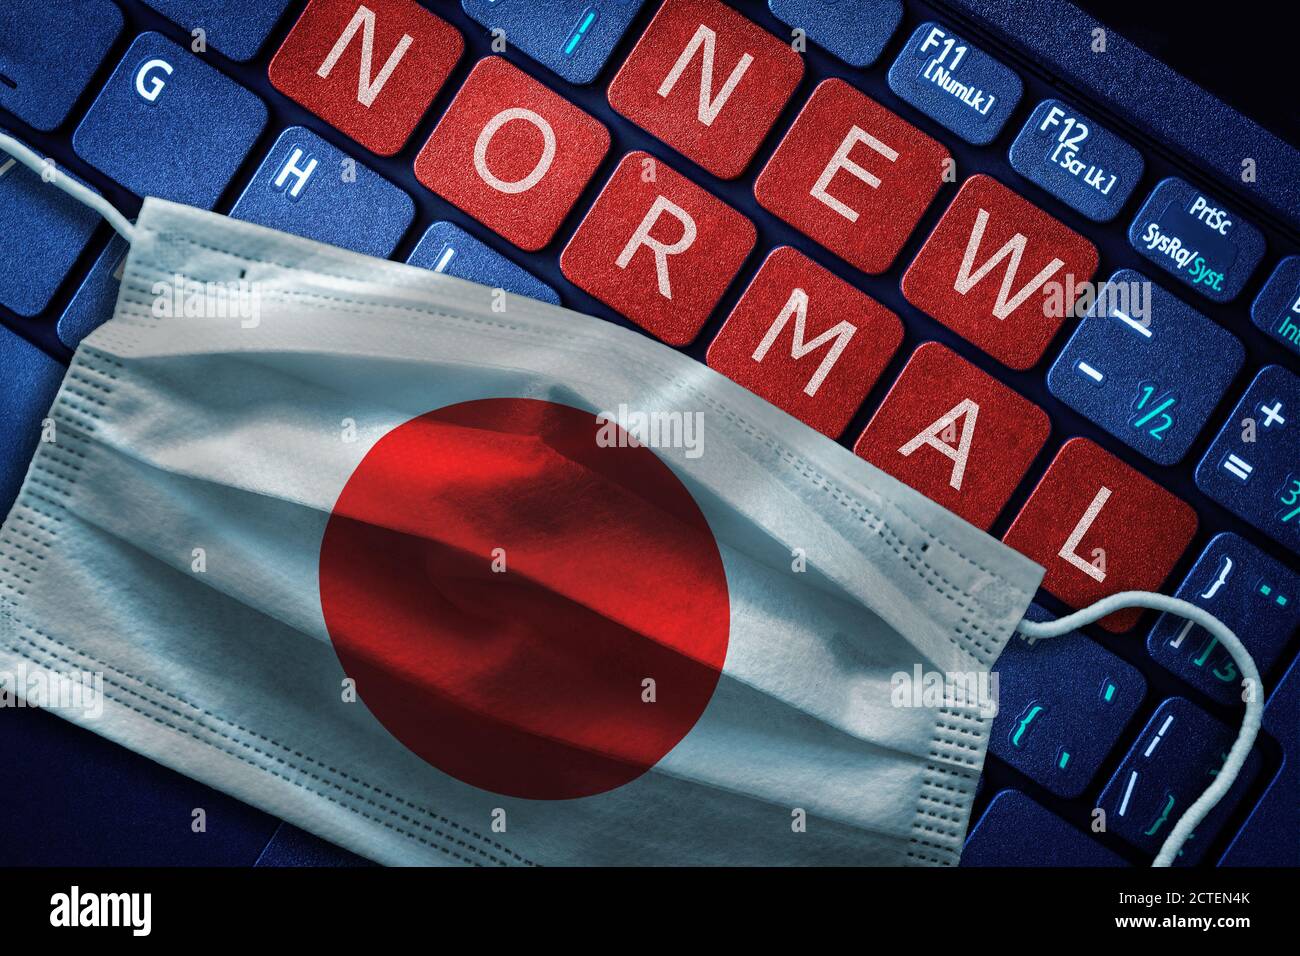 COVID-19 coronavirus new normal concept in Japan as shown by Japanese flag on face mask with New Normal on laptop red alert keyboard buttons. Stock Photo